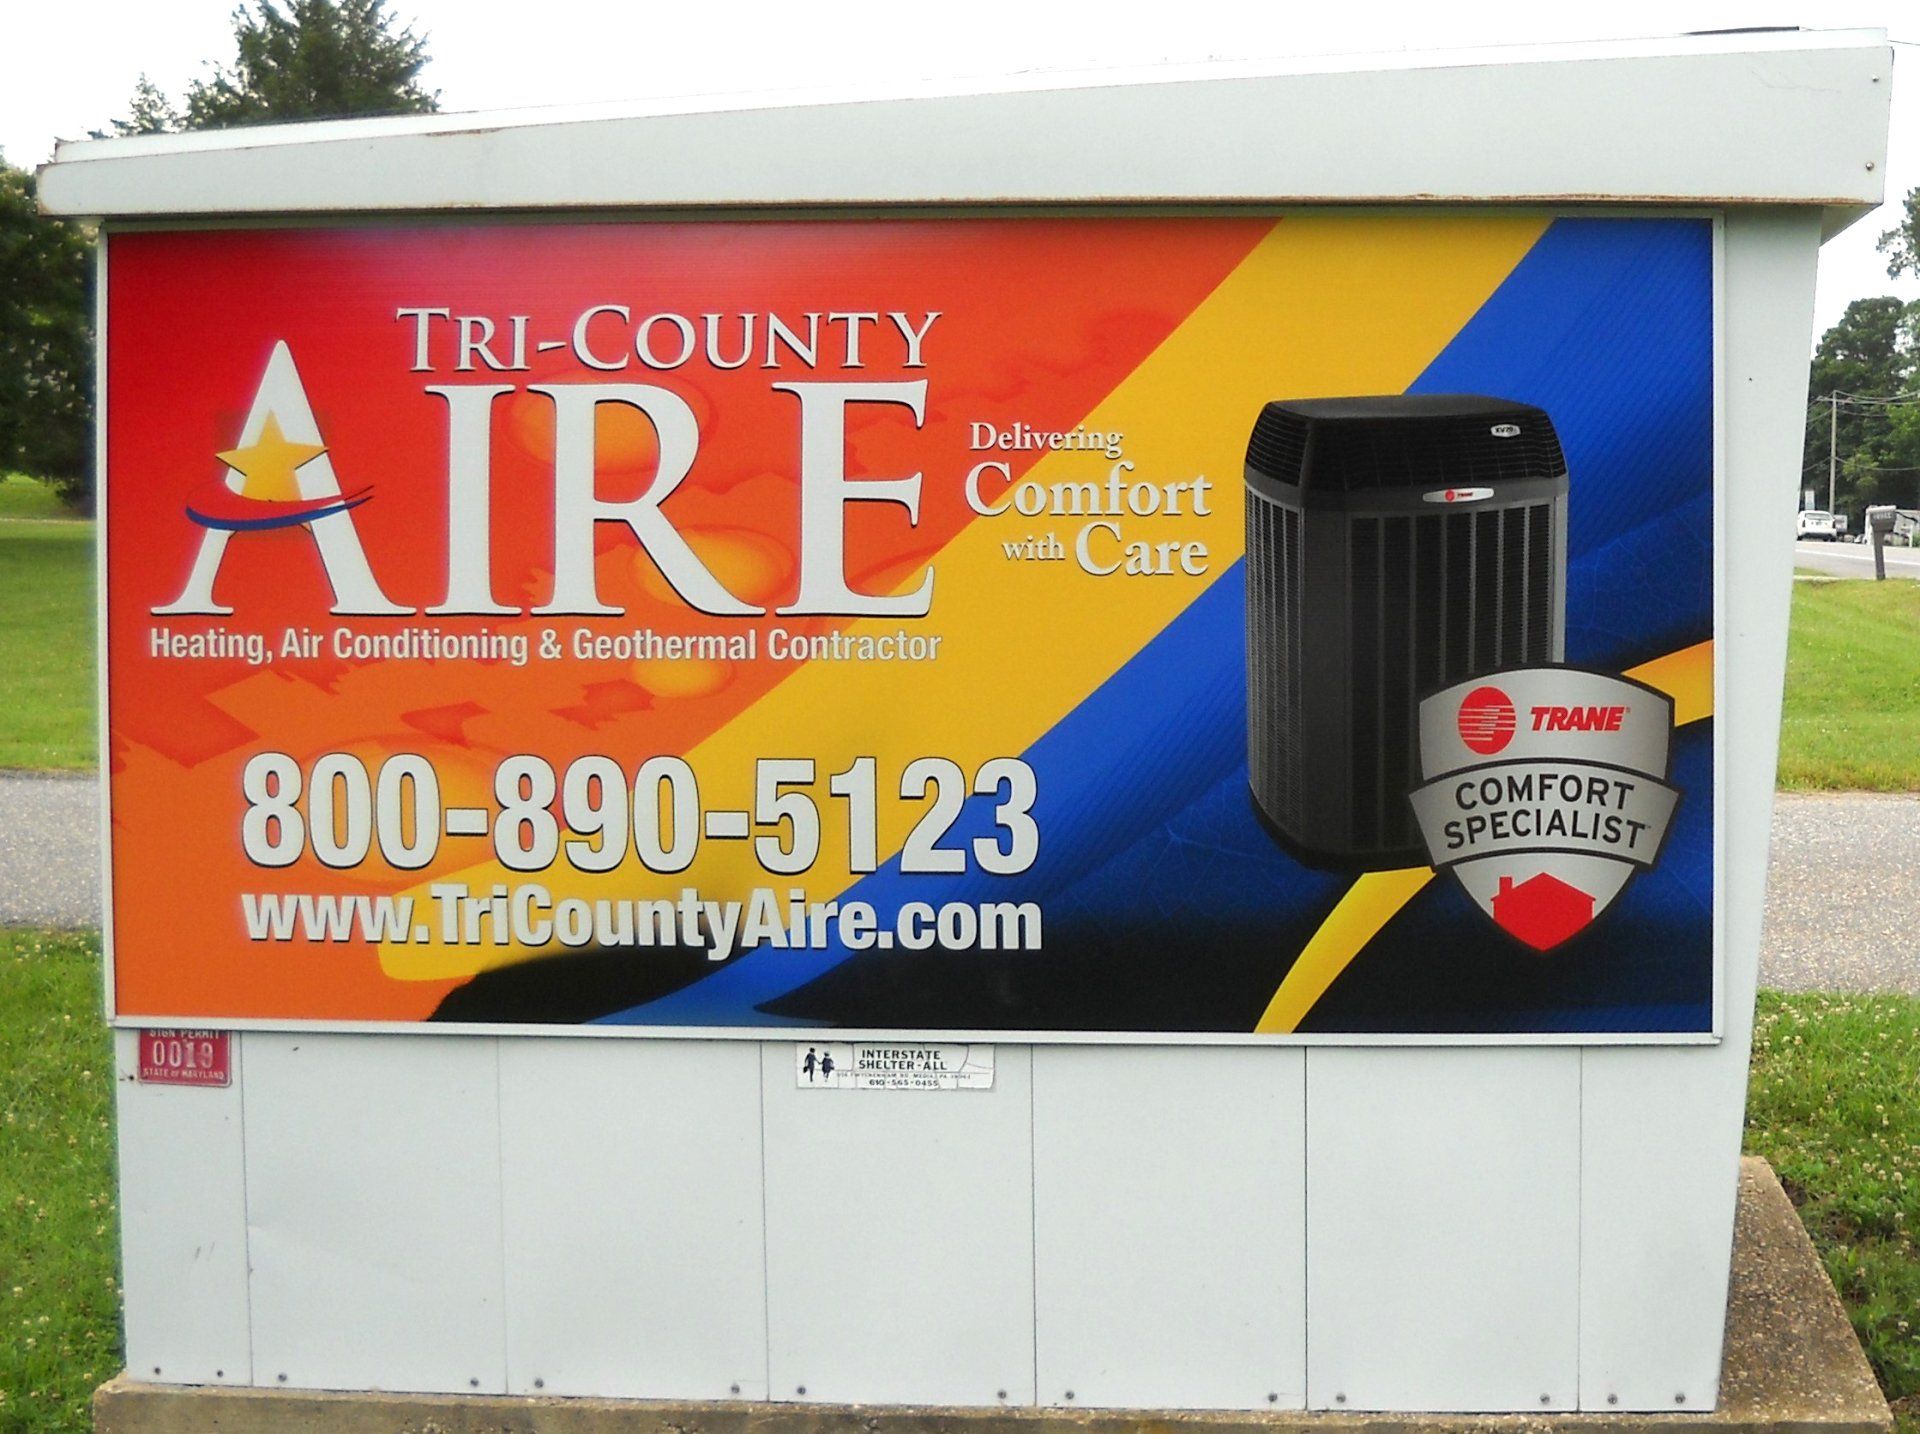 A tri-county aire sign with a picture of an air conditioner